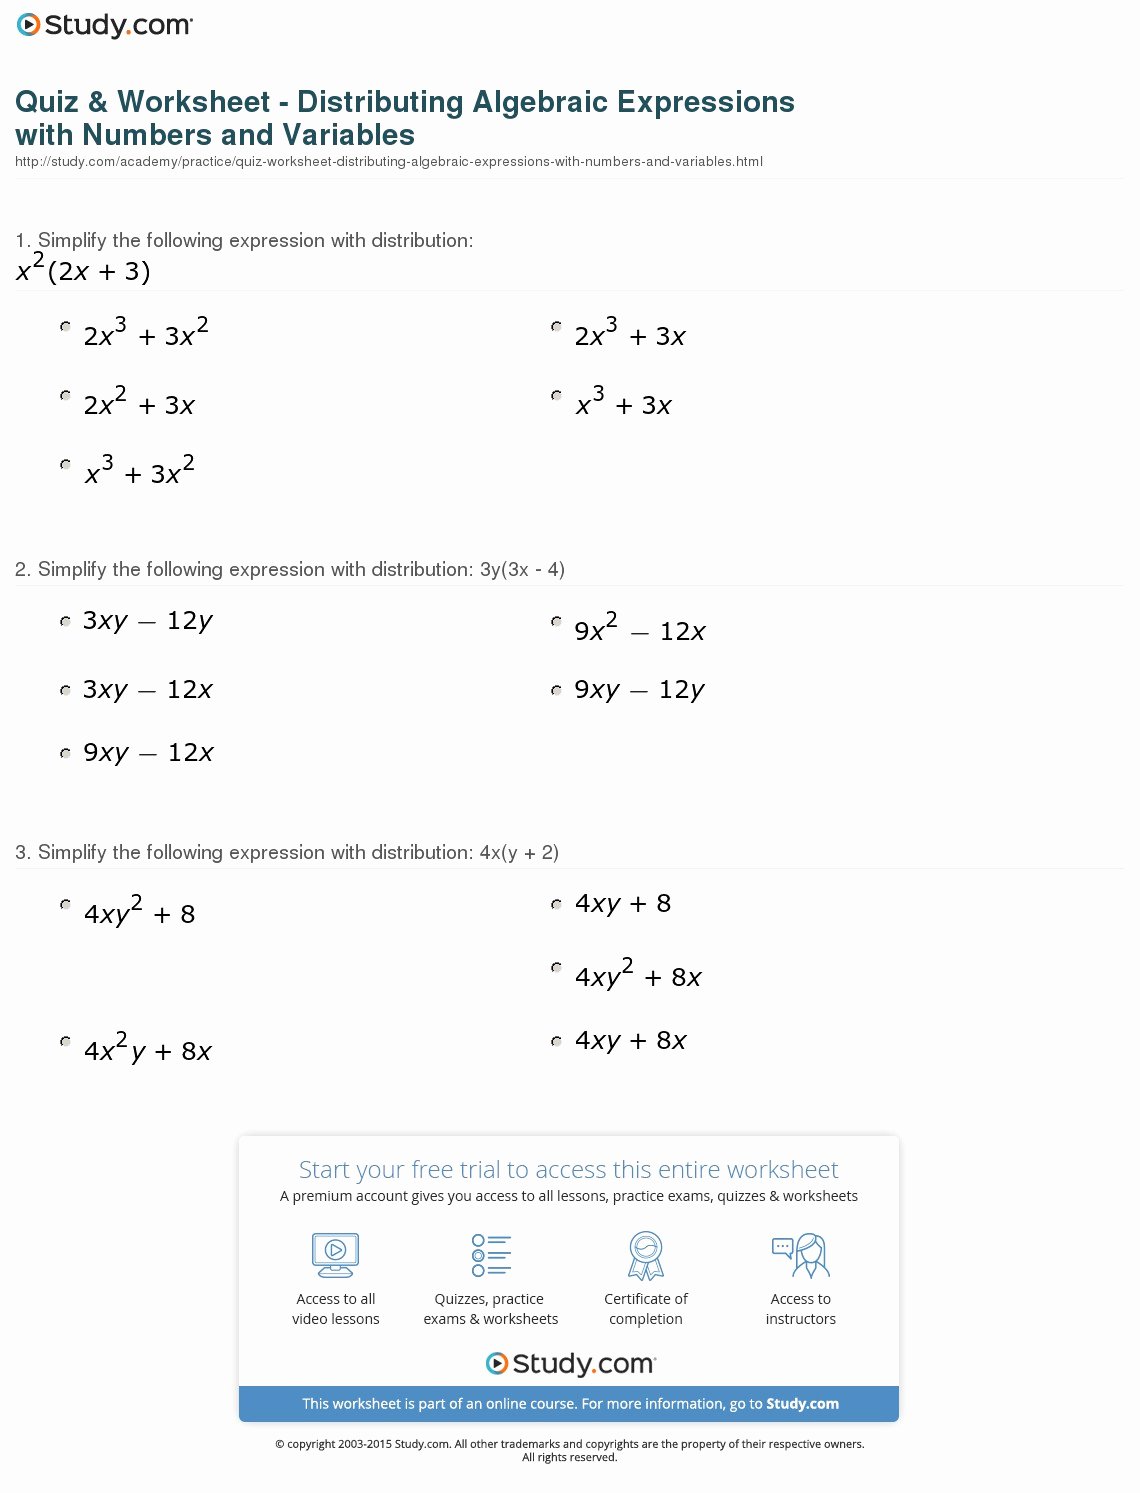 Variables and Expressions Worksheet Answers Luxury Quiz &amp; Worksheet Distributing Algebraic Expressions with